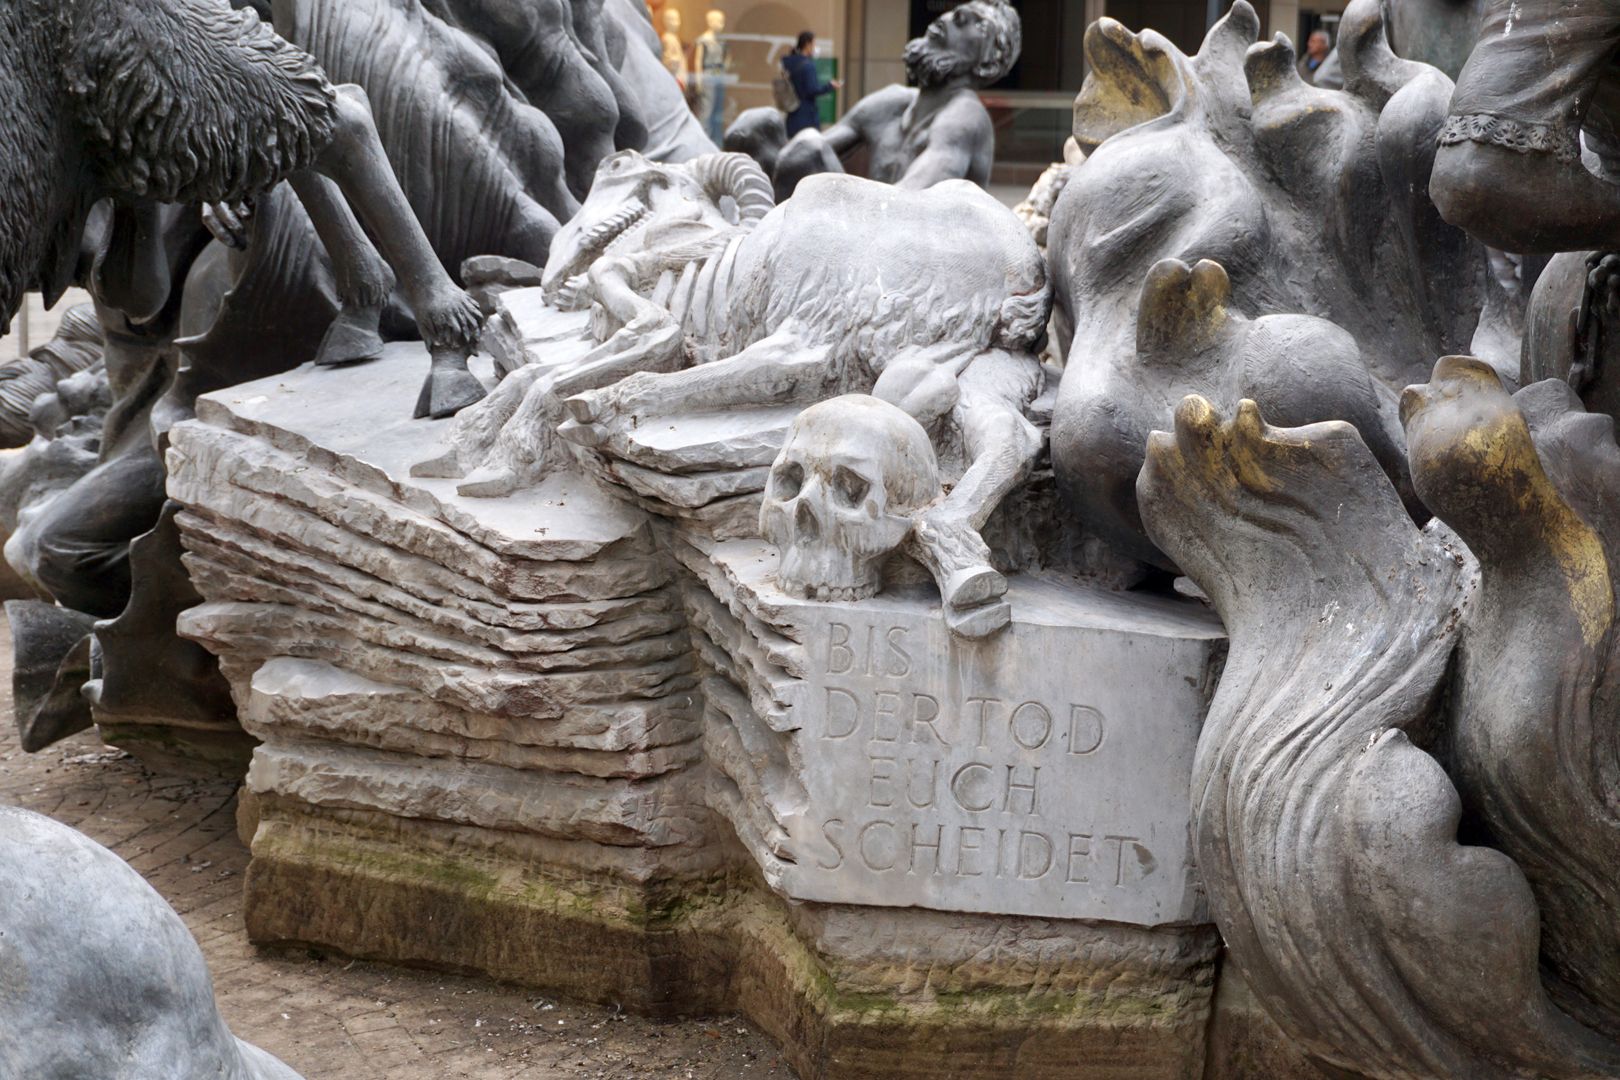 Marriage carousel/ Hans Sachs Fountain Marital rock, on which the dead couple is displayed as the goat perished and as a human skull. "Till death you to part."